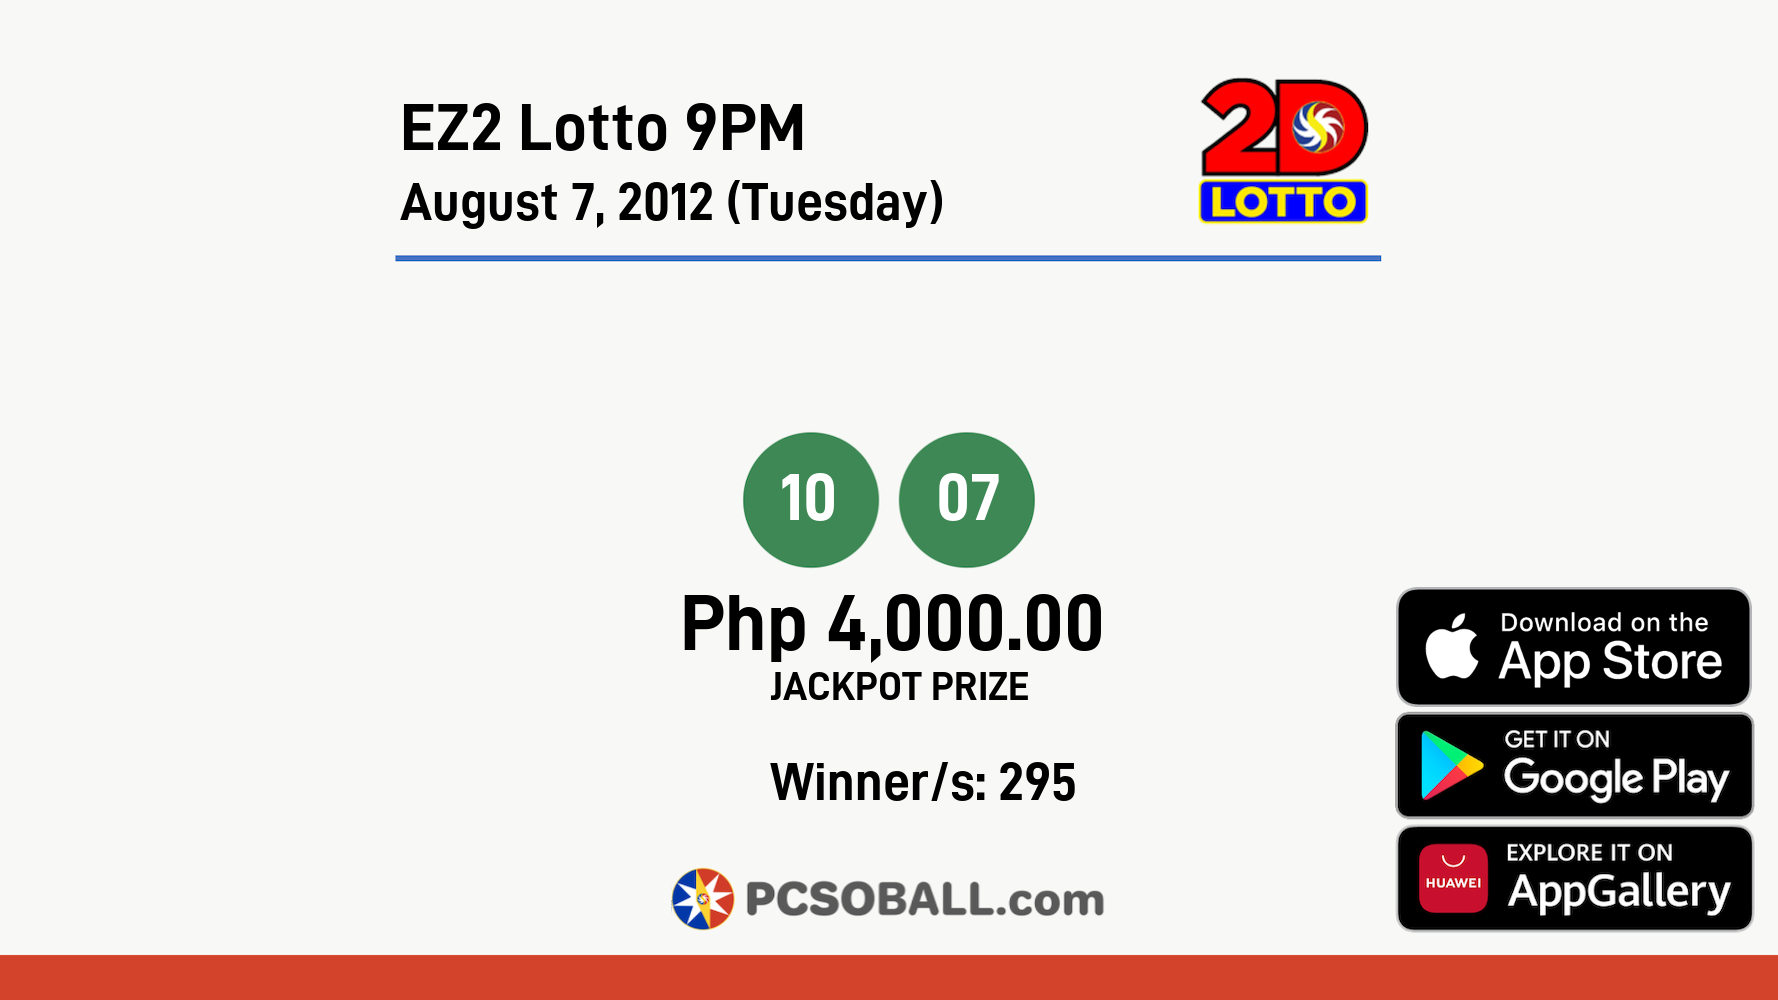 EZ2 Lotto 9PM August 7, 2012 (Tuesday) Result